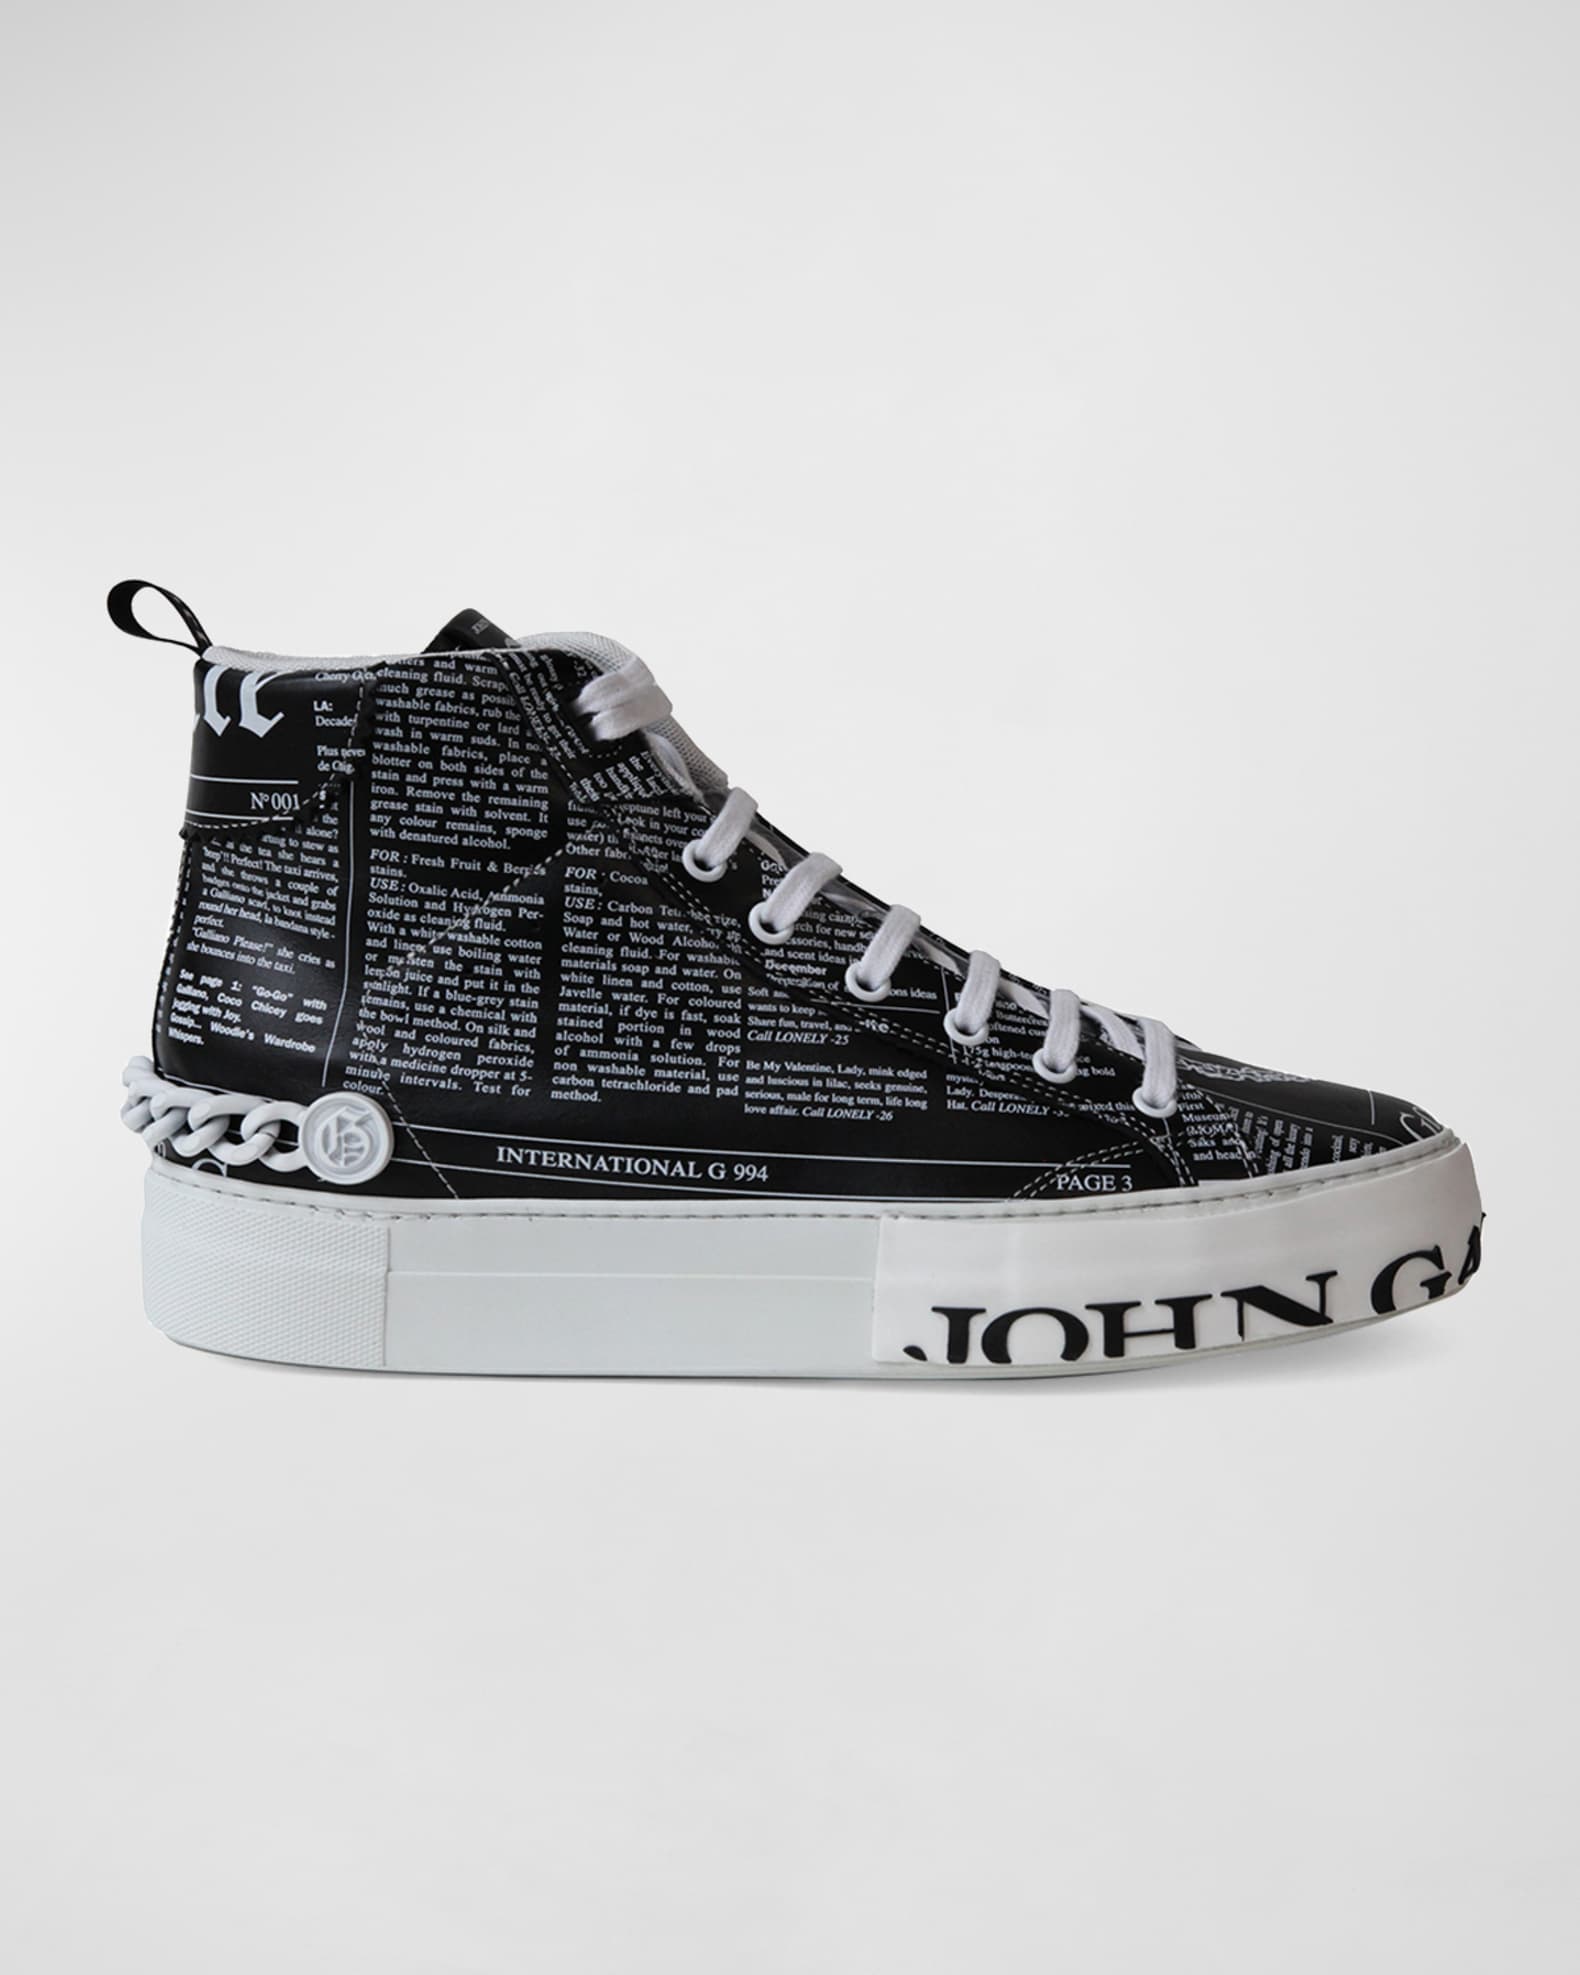 John Galliano High-top Leather Sneakers in Black for Men